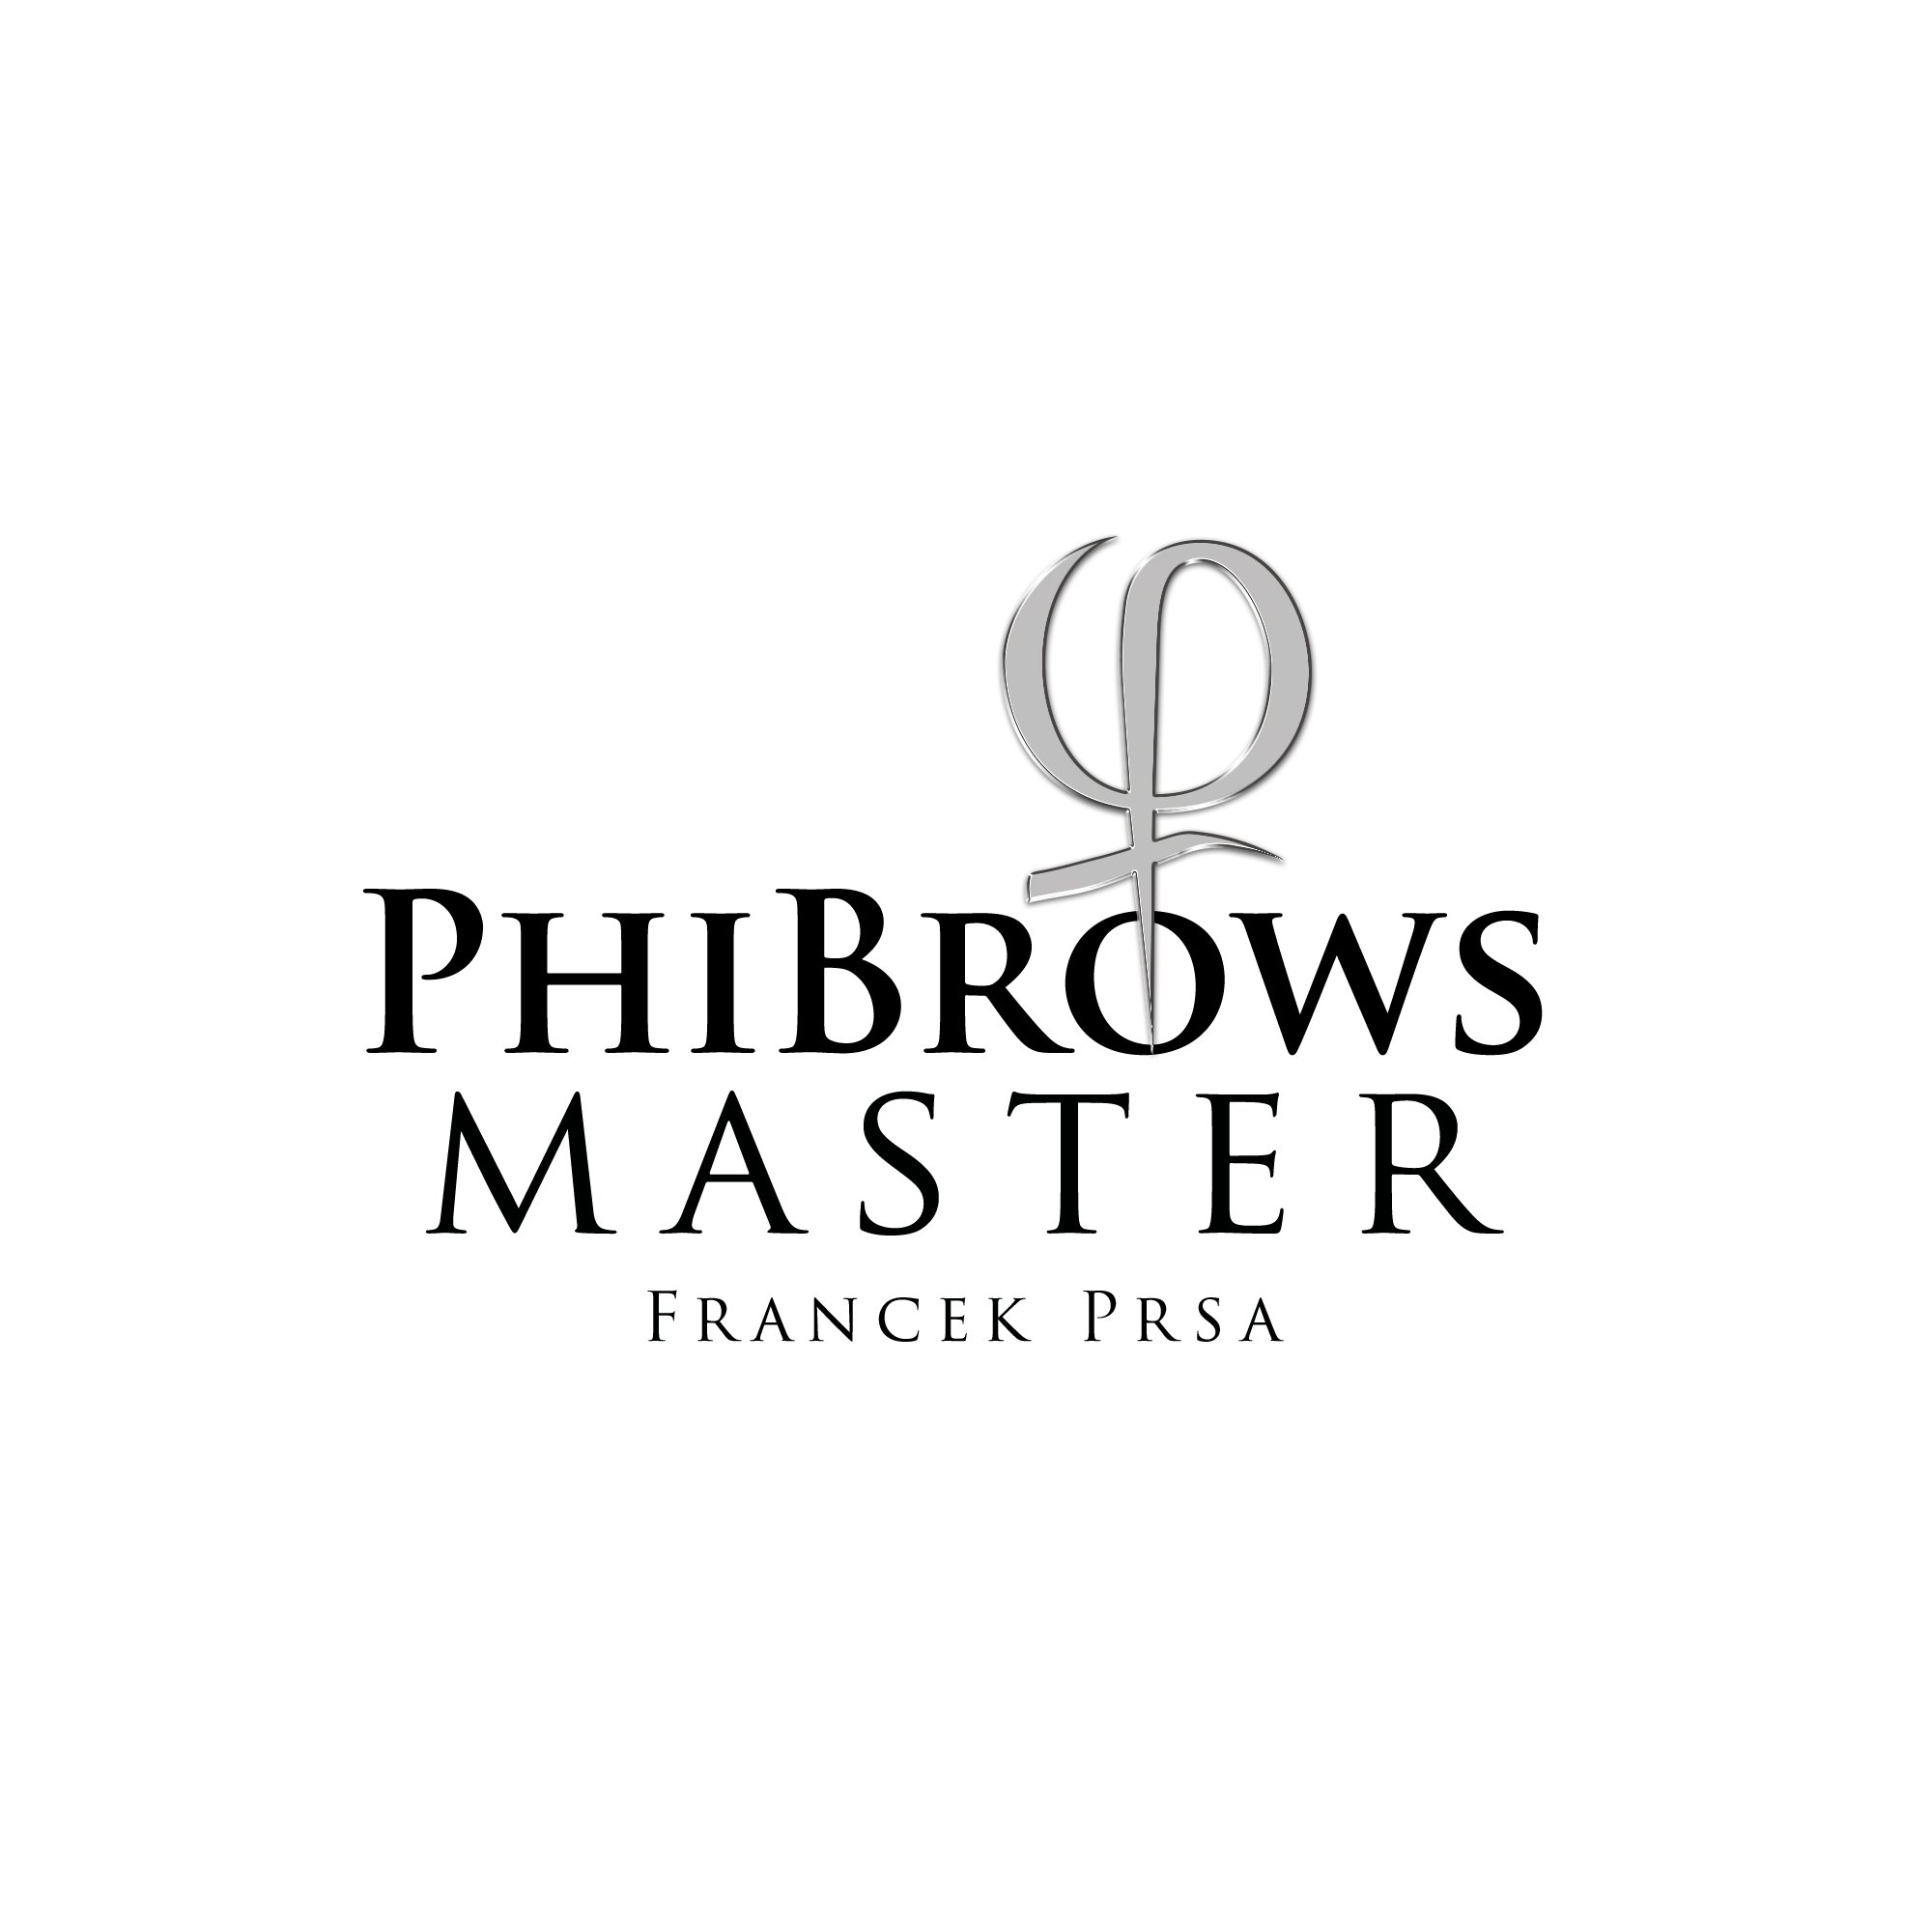 Francek Prsa is one of the PhiMasters holding classes in the entire world. All his previous knowledge is now redirected to Microblading.